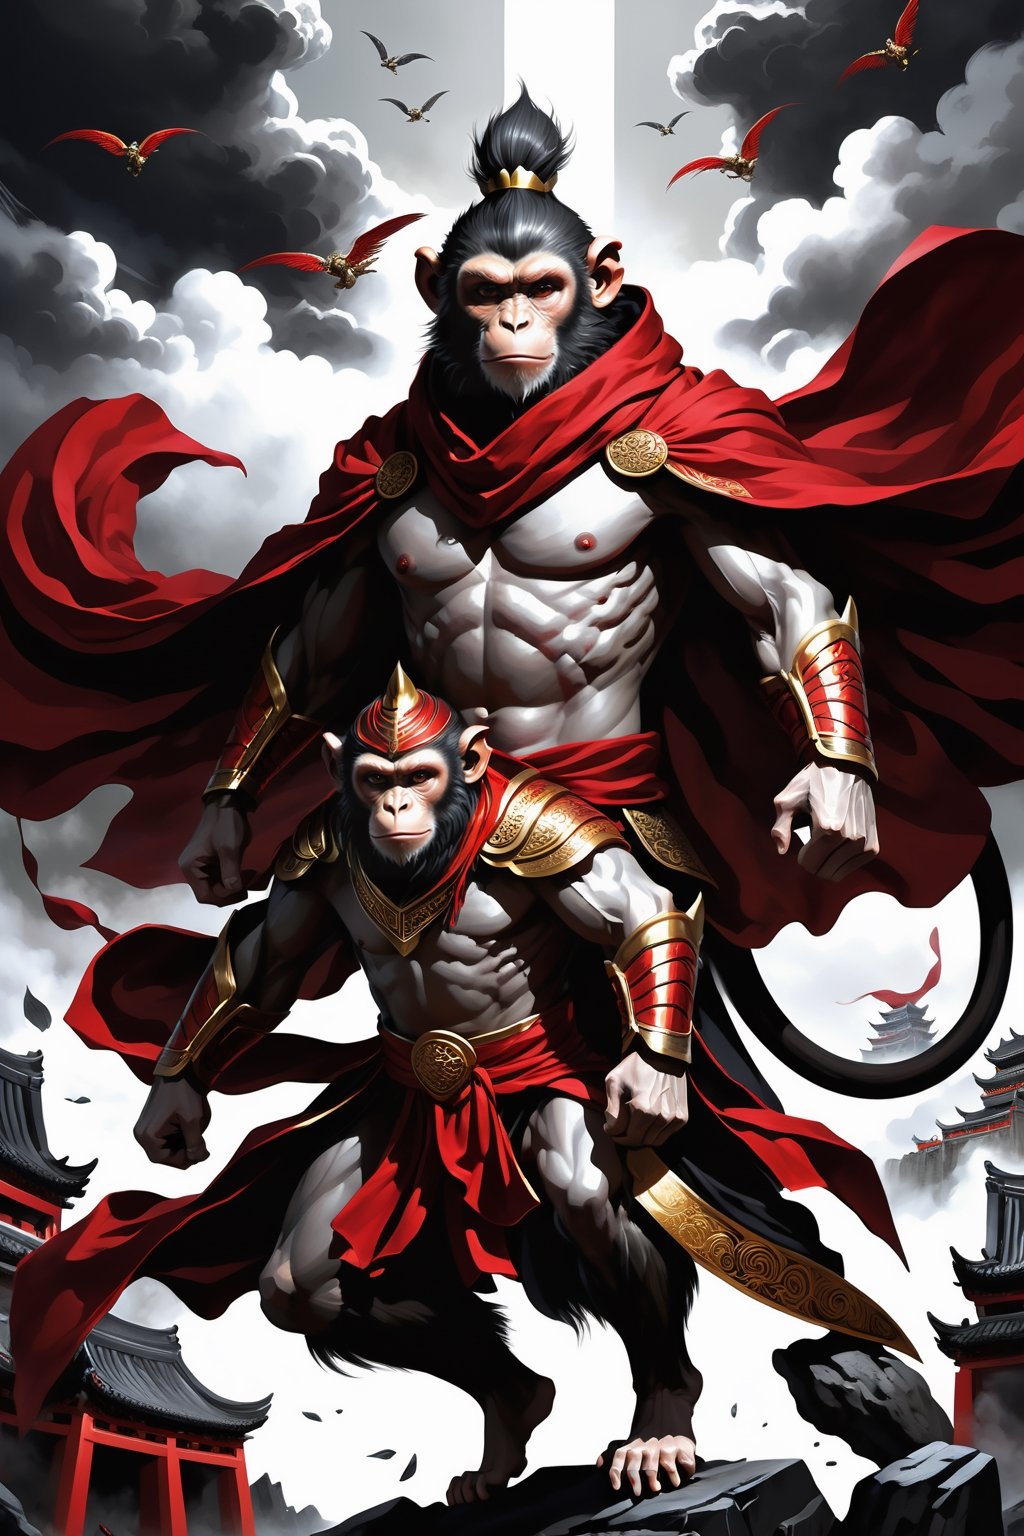 a man  Mythical hero Monkey-like features Playful yet serious expression Humanoid figure Expressive facial features Mystical aura Iconic headband Tail  
Ancient city Ultra-fine painting
Black armor
Red cloak
Fierce expression
Indomitable will
Invincible aura
Lonely guardian
Warring States, Three Kingdoms style
Aerial view
Ferocious face
Sharp eyes
Fluttering armor and cloak
Ruined ancient city
Desolate atmosphere
Central figure
Dark sky
Dark, gray, brown tones Red and gold highlights


3D Realistic Style Highly detailed 4k, 8k, highres: 4K, 8K
Realistic, photorealistic, photo-realistic, in the style of esao andrews,DonM3lv3nM4g1cXL,LegendDarkFantasy,more detail XL